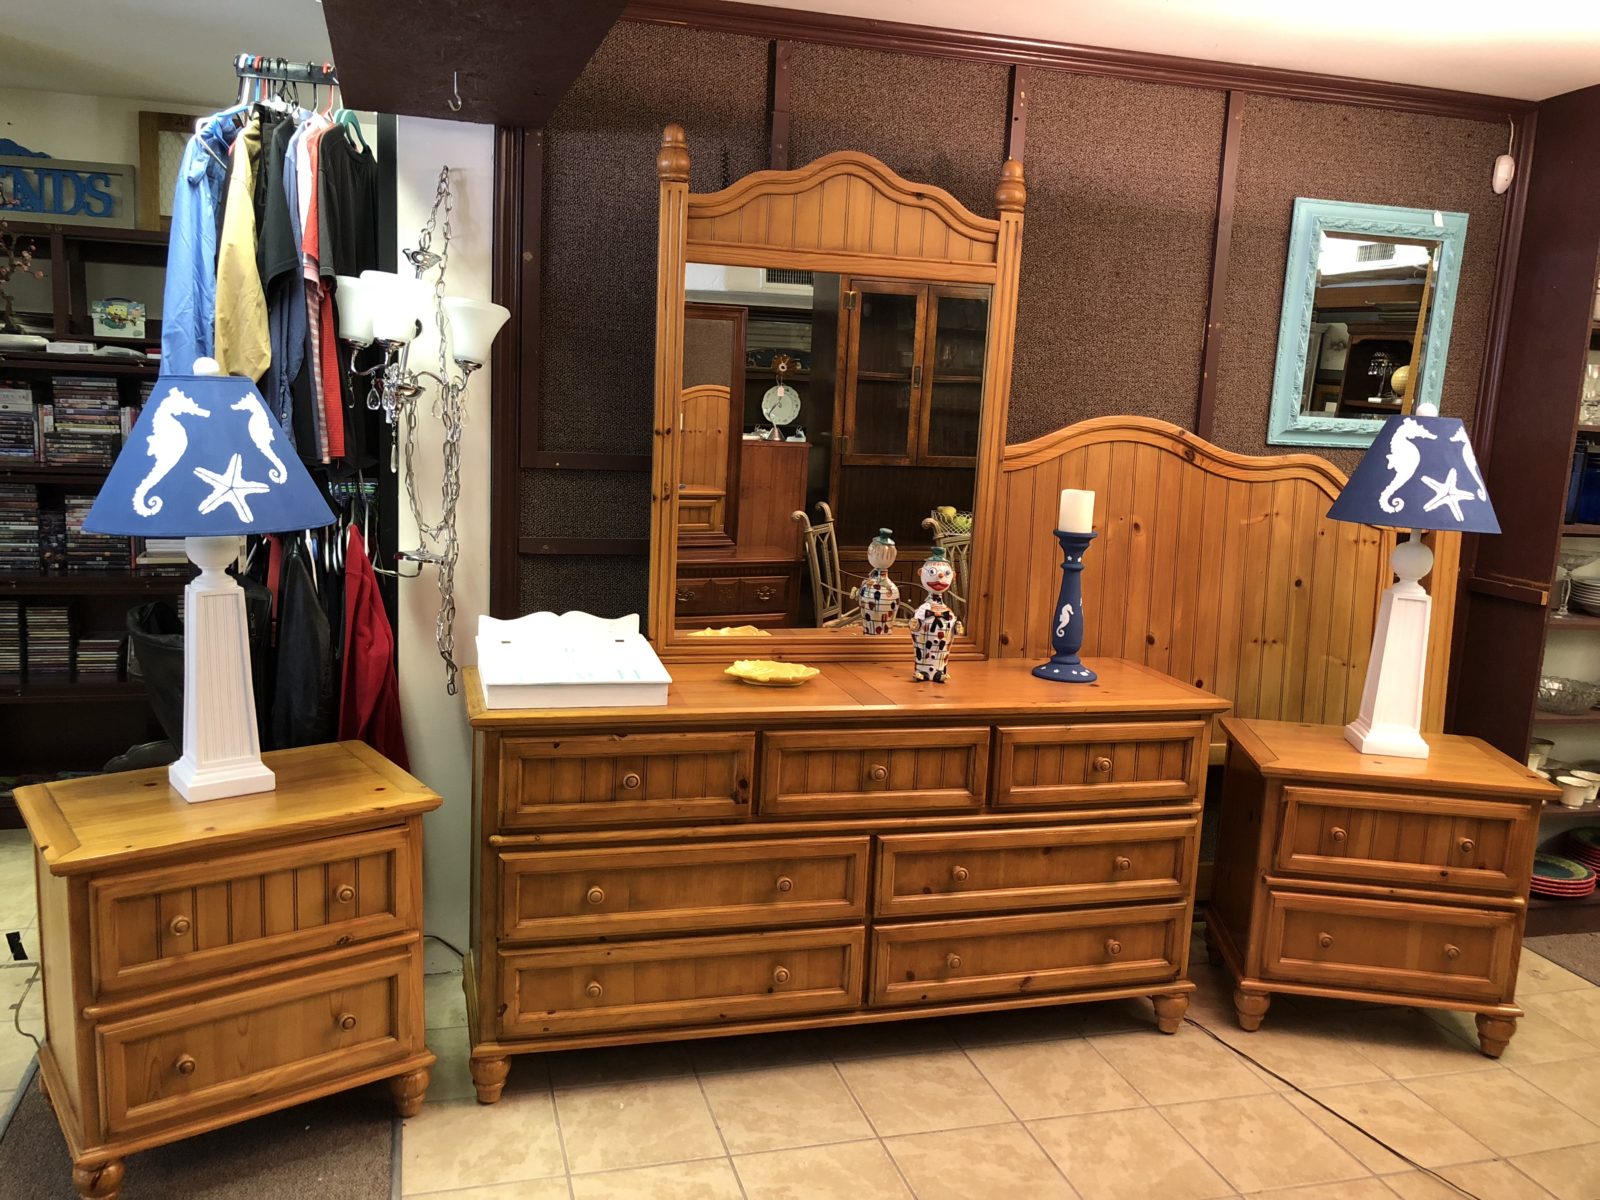 Solid Pine King Bedroom Set • Beautiful Solid Ping King Size Bedroom Set. Set includes King Headboard, rails, dresser w/Mirror and 2 Night Stands. Some wear on dresser top all else in excellent condition.